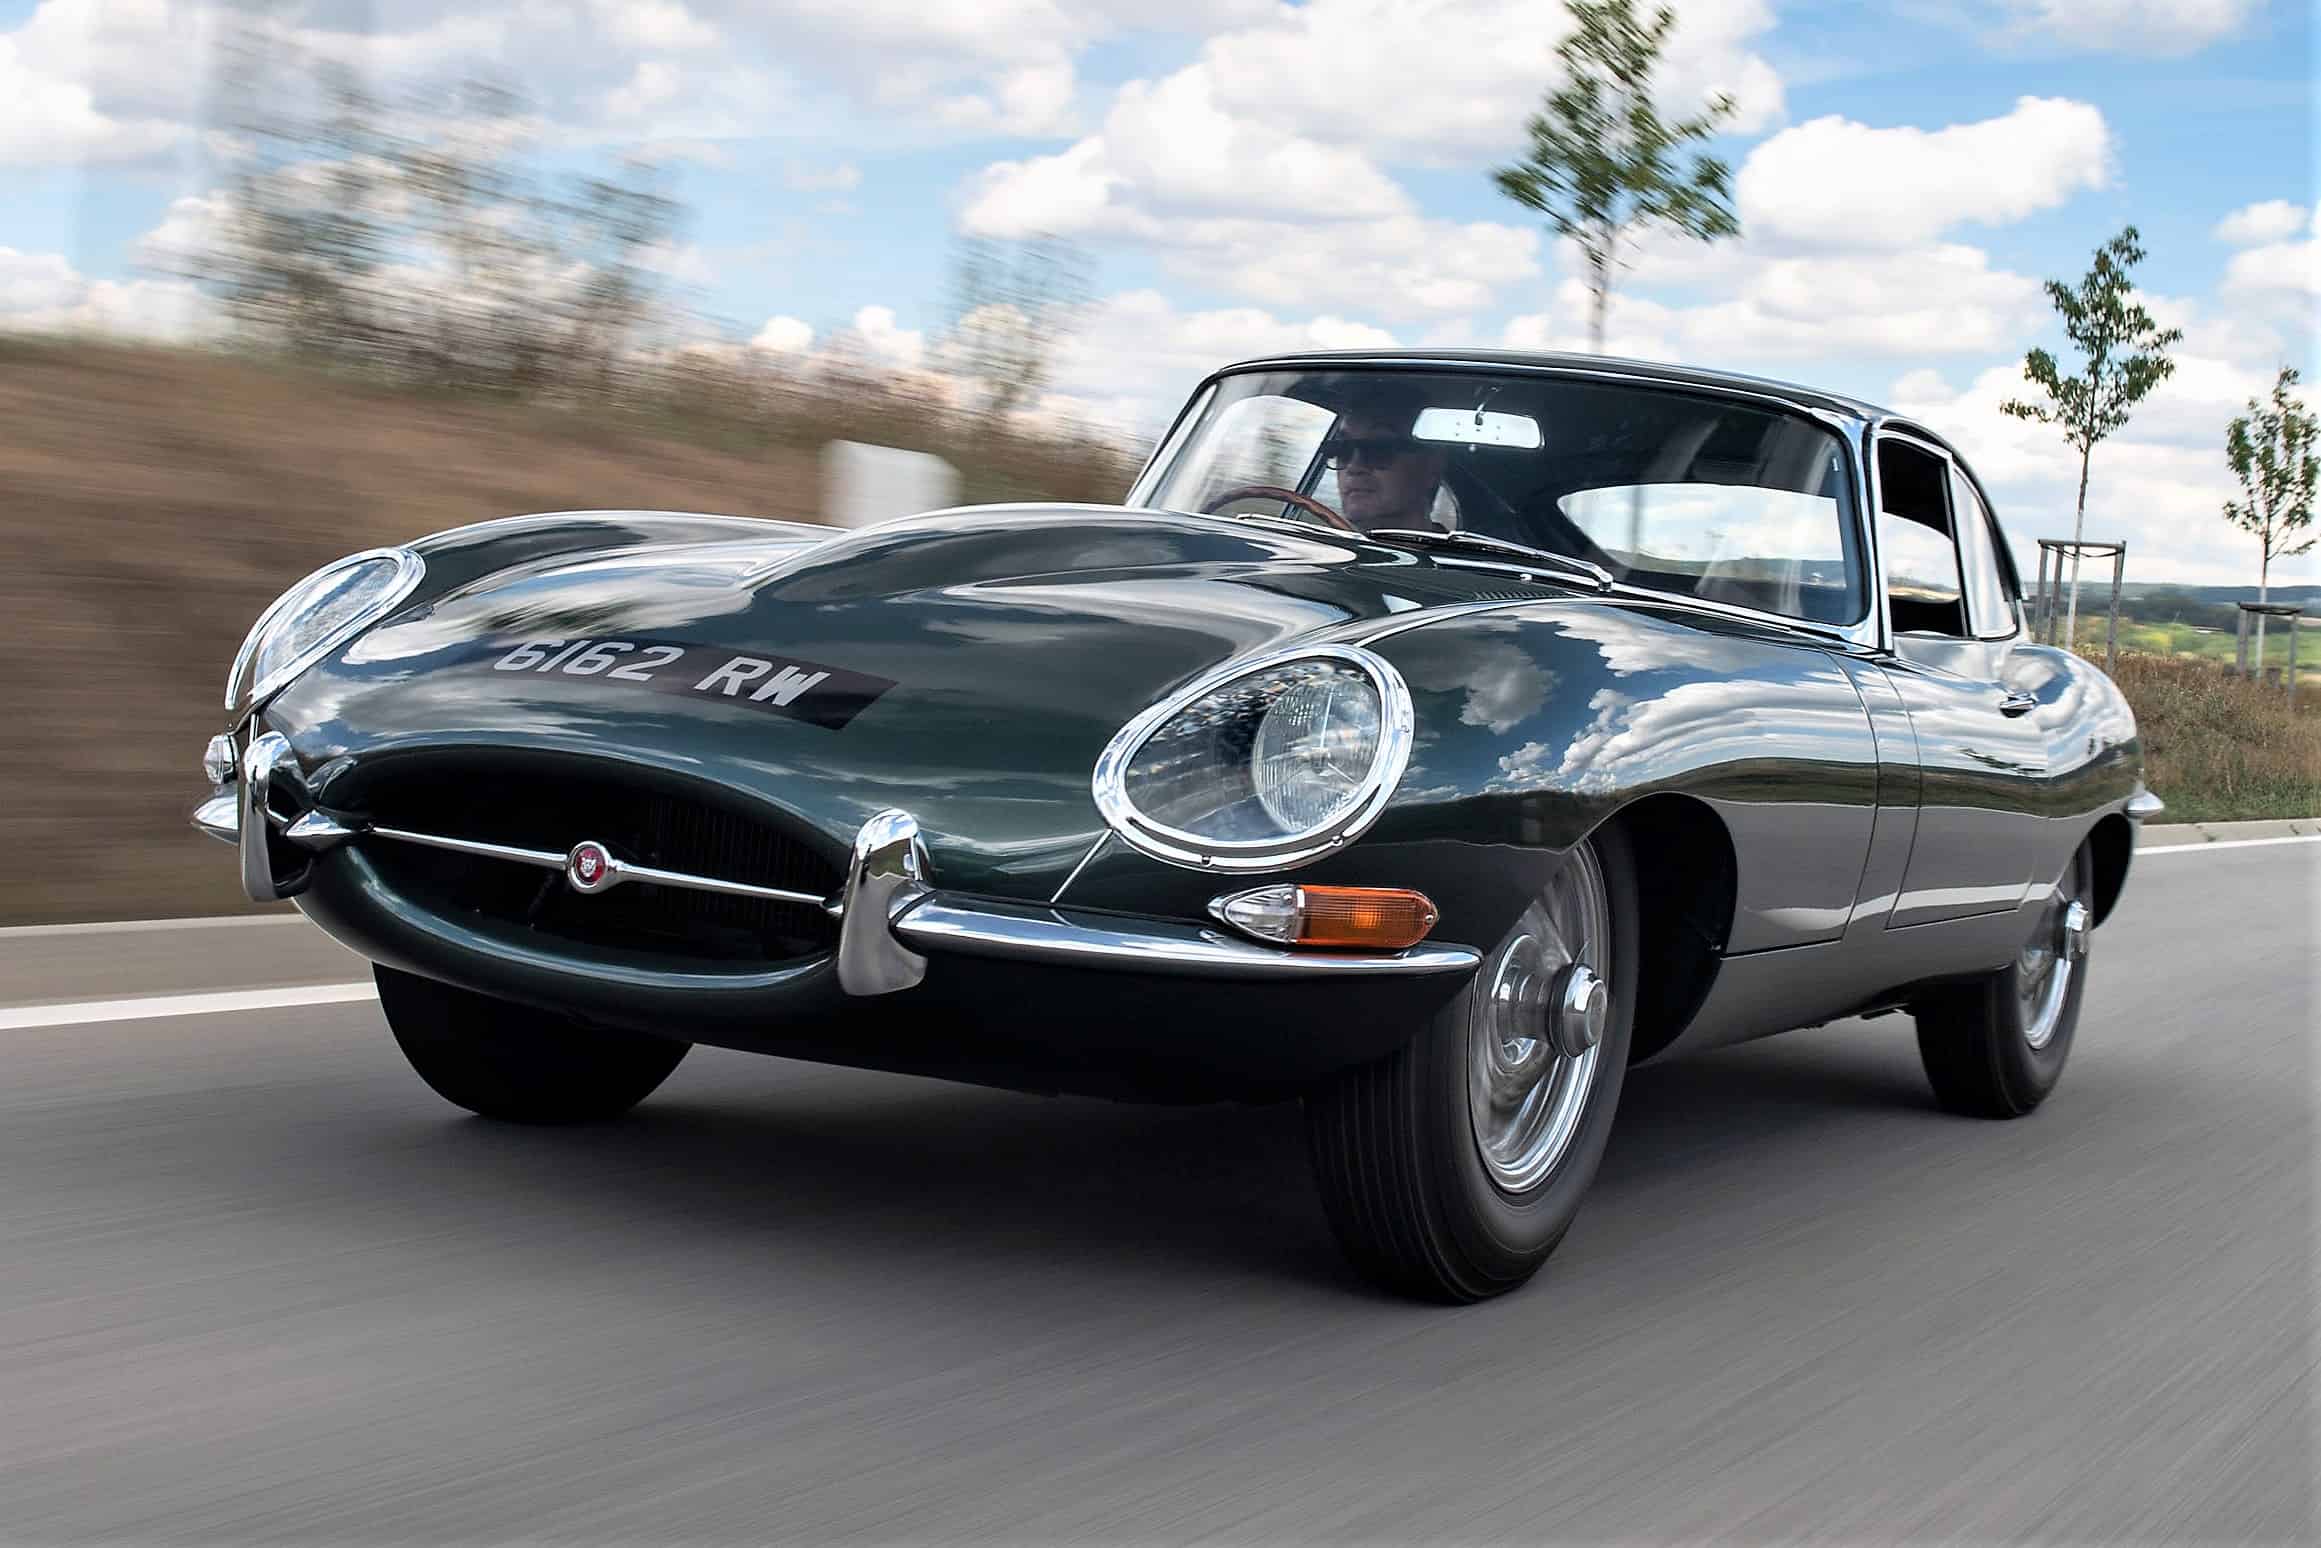 Historic 1961 Jaguar Etype readied for RM Sotheby’s auction in London